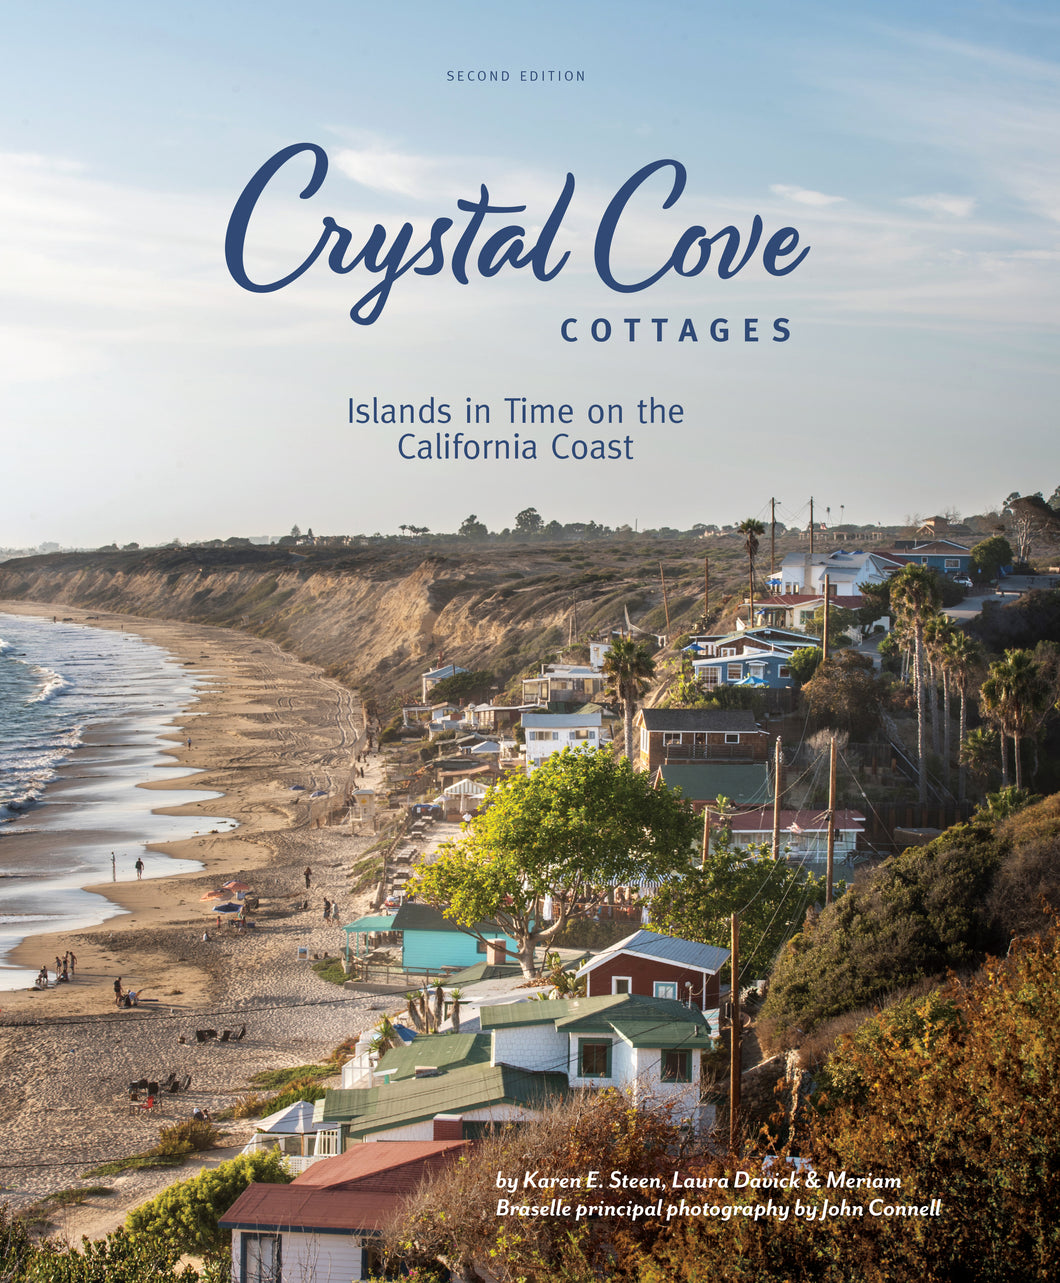 Crystal Cove Cottages - Islands in Time on the California Coast